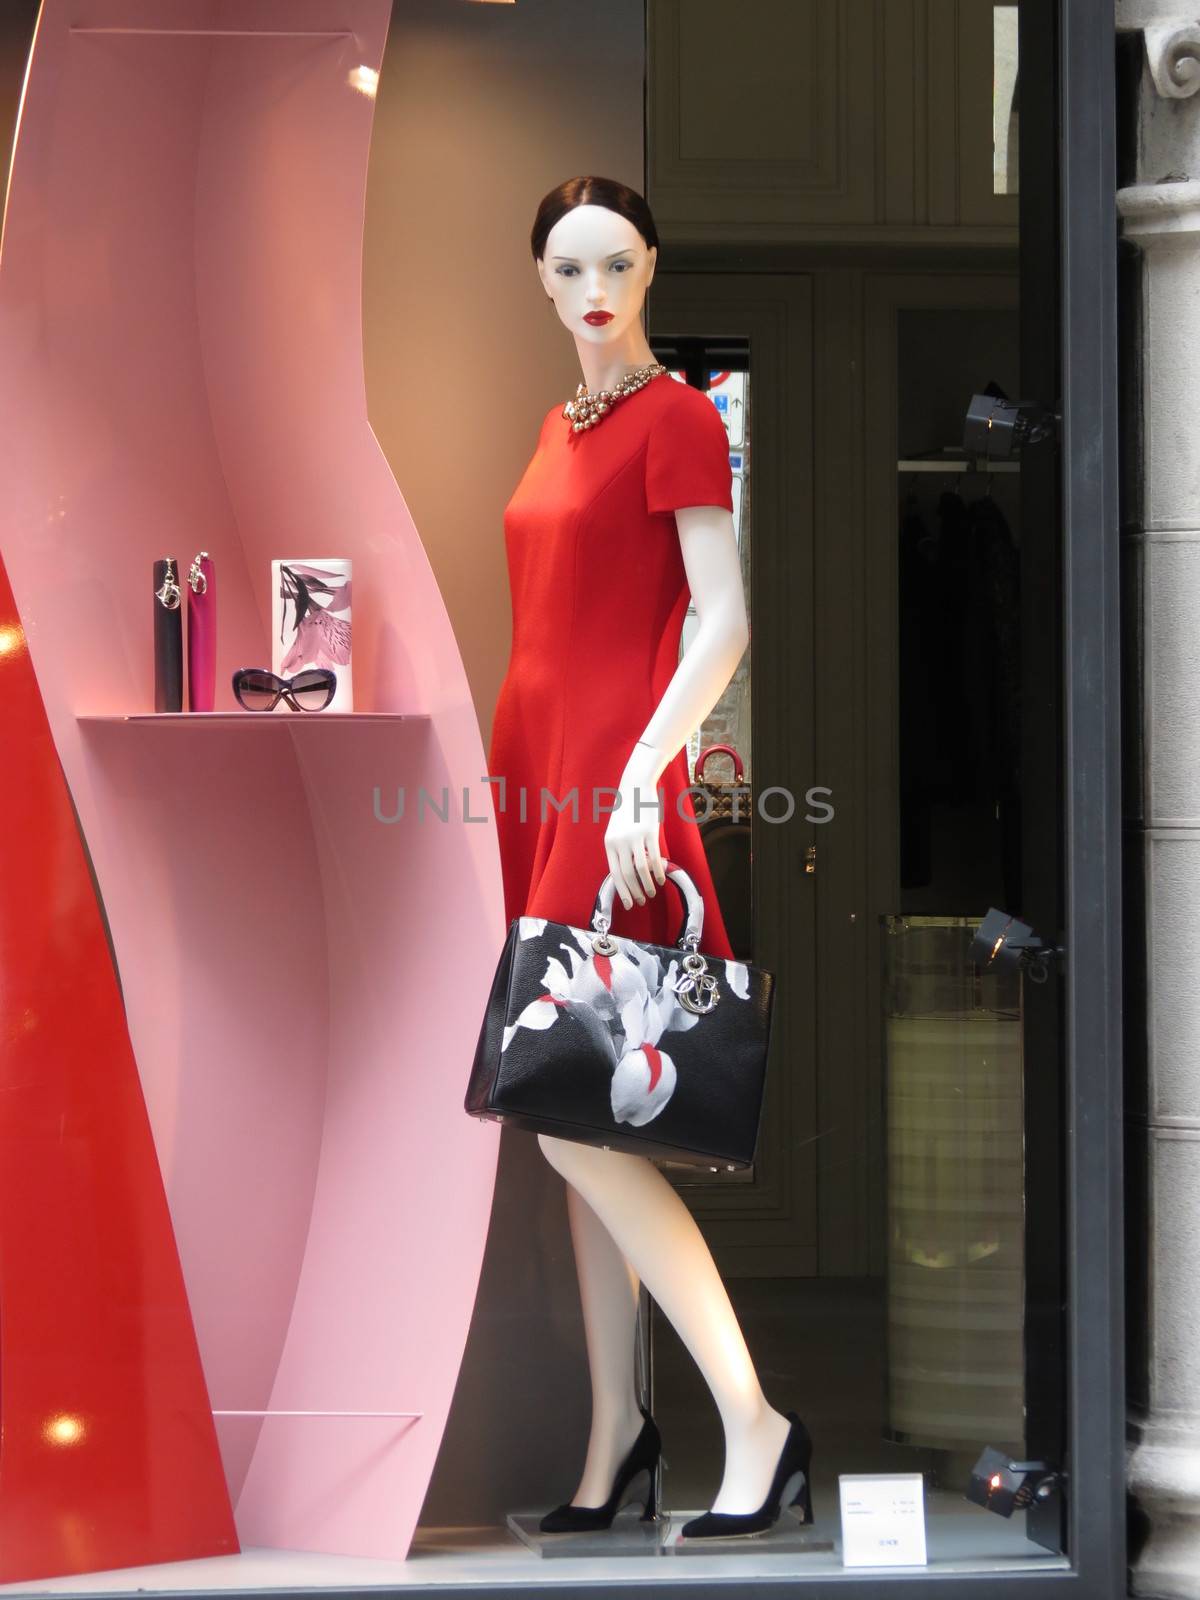 MILAN (ITALY), 31 JULY 2014 - woman mannequin with stylish red dress and black bag in a shop-window